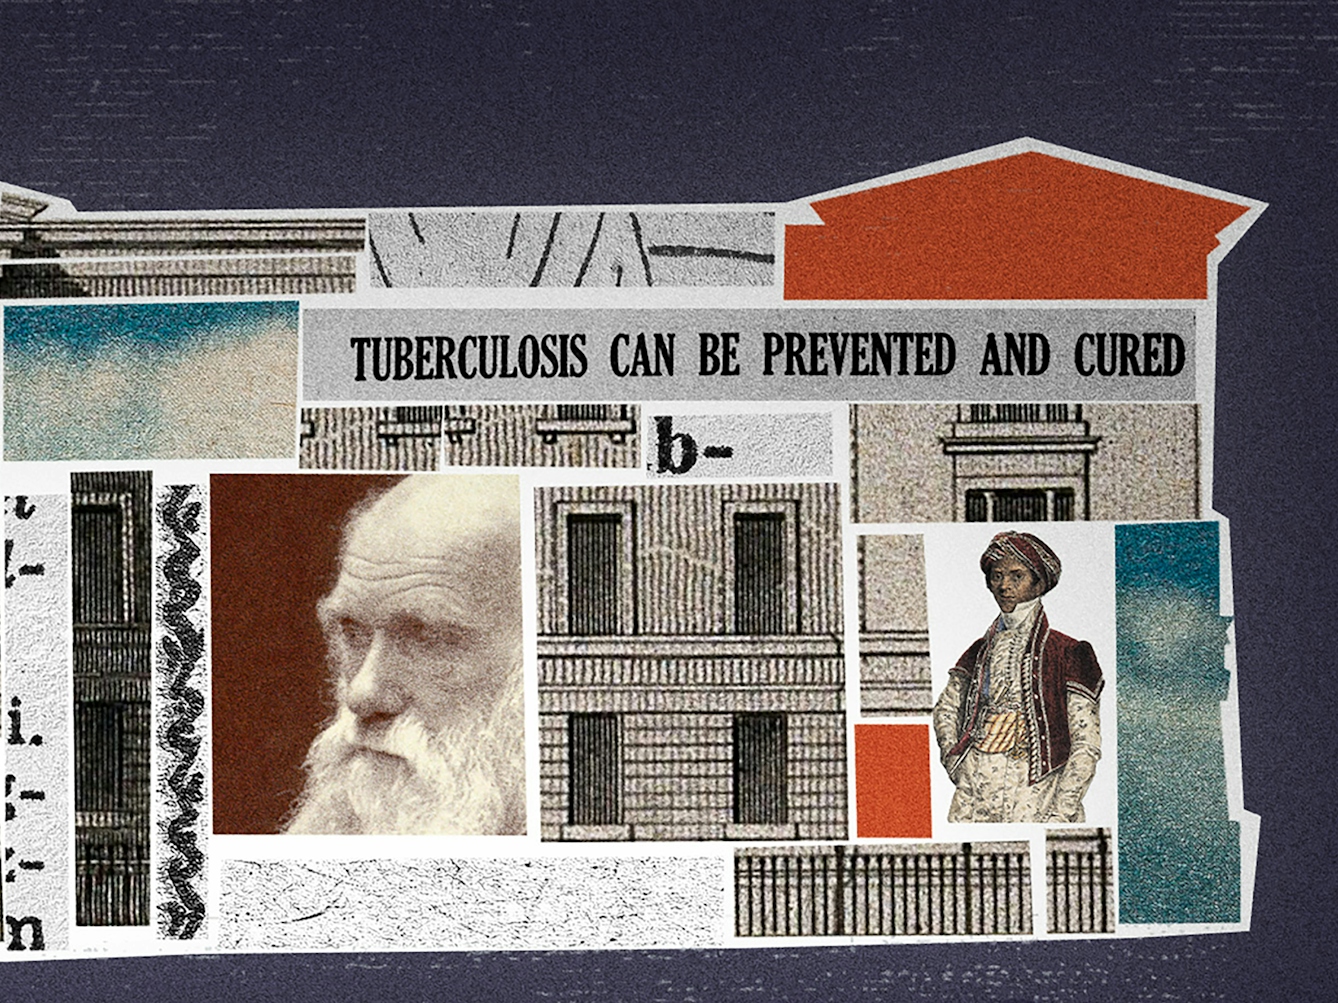 Crop from a larger digital collage. Shown is a building, labelled 'North London Hospital'. The building's interior is filled with different collage elements, including newspaper cut-outs reading 'Tuberculosis can be prevented and cured', 'Tuberculosis must go!' and 'Eugenics'. There is an image of a sphygmograph, and an image showing physiognomy. There are photos of Charles Darwin, Francis Galton and Sake Dean. There are orange and turquoise rectangles in the interior, and an orange path leading out of the building's front door. 